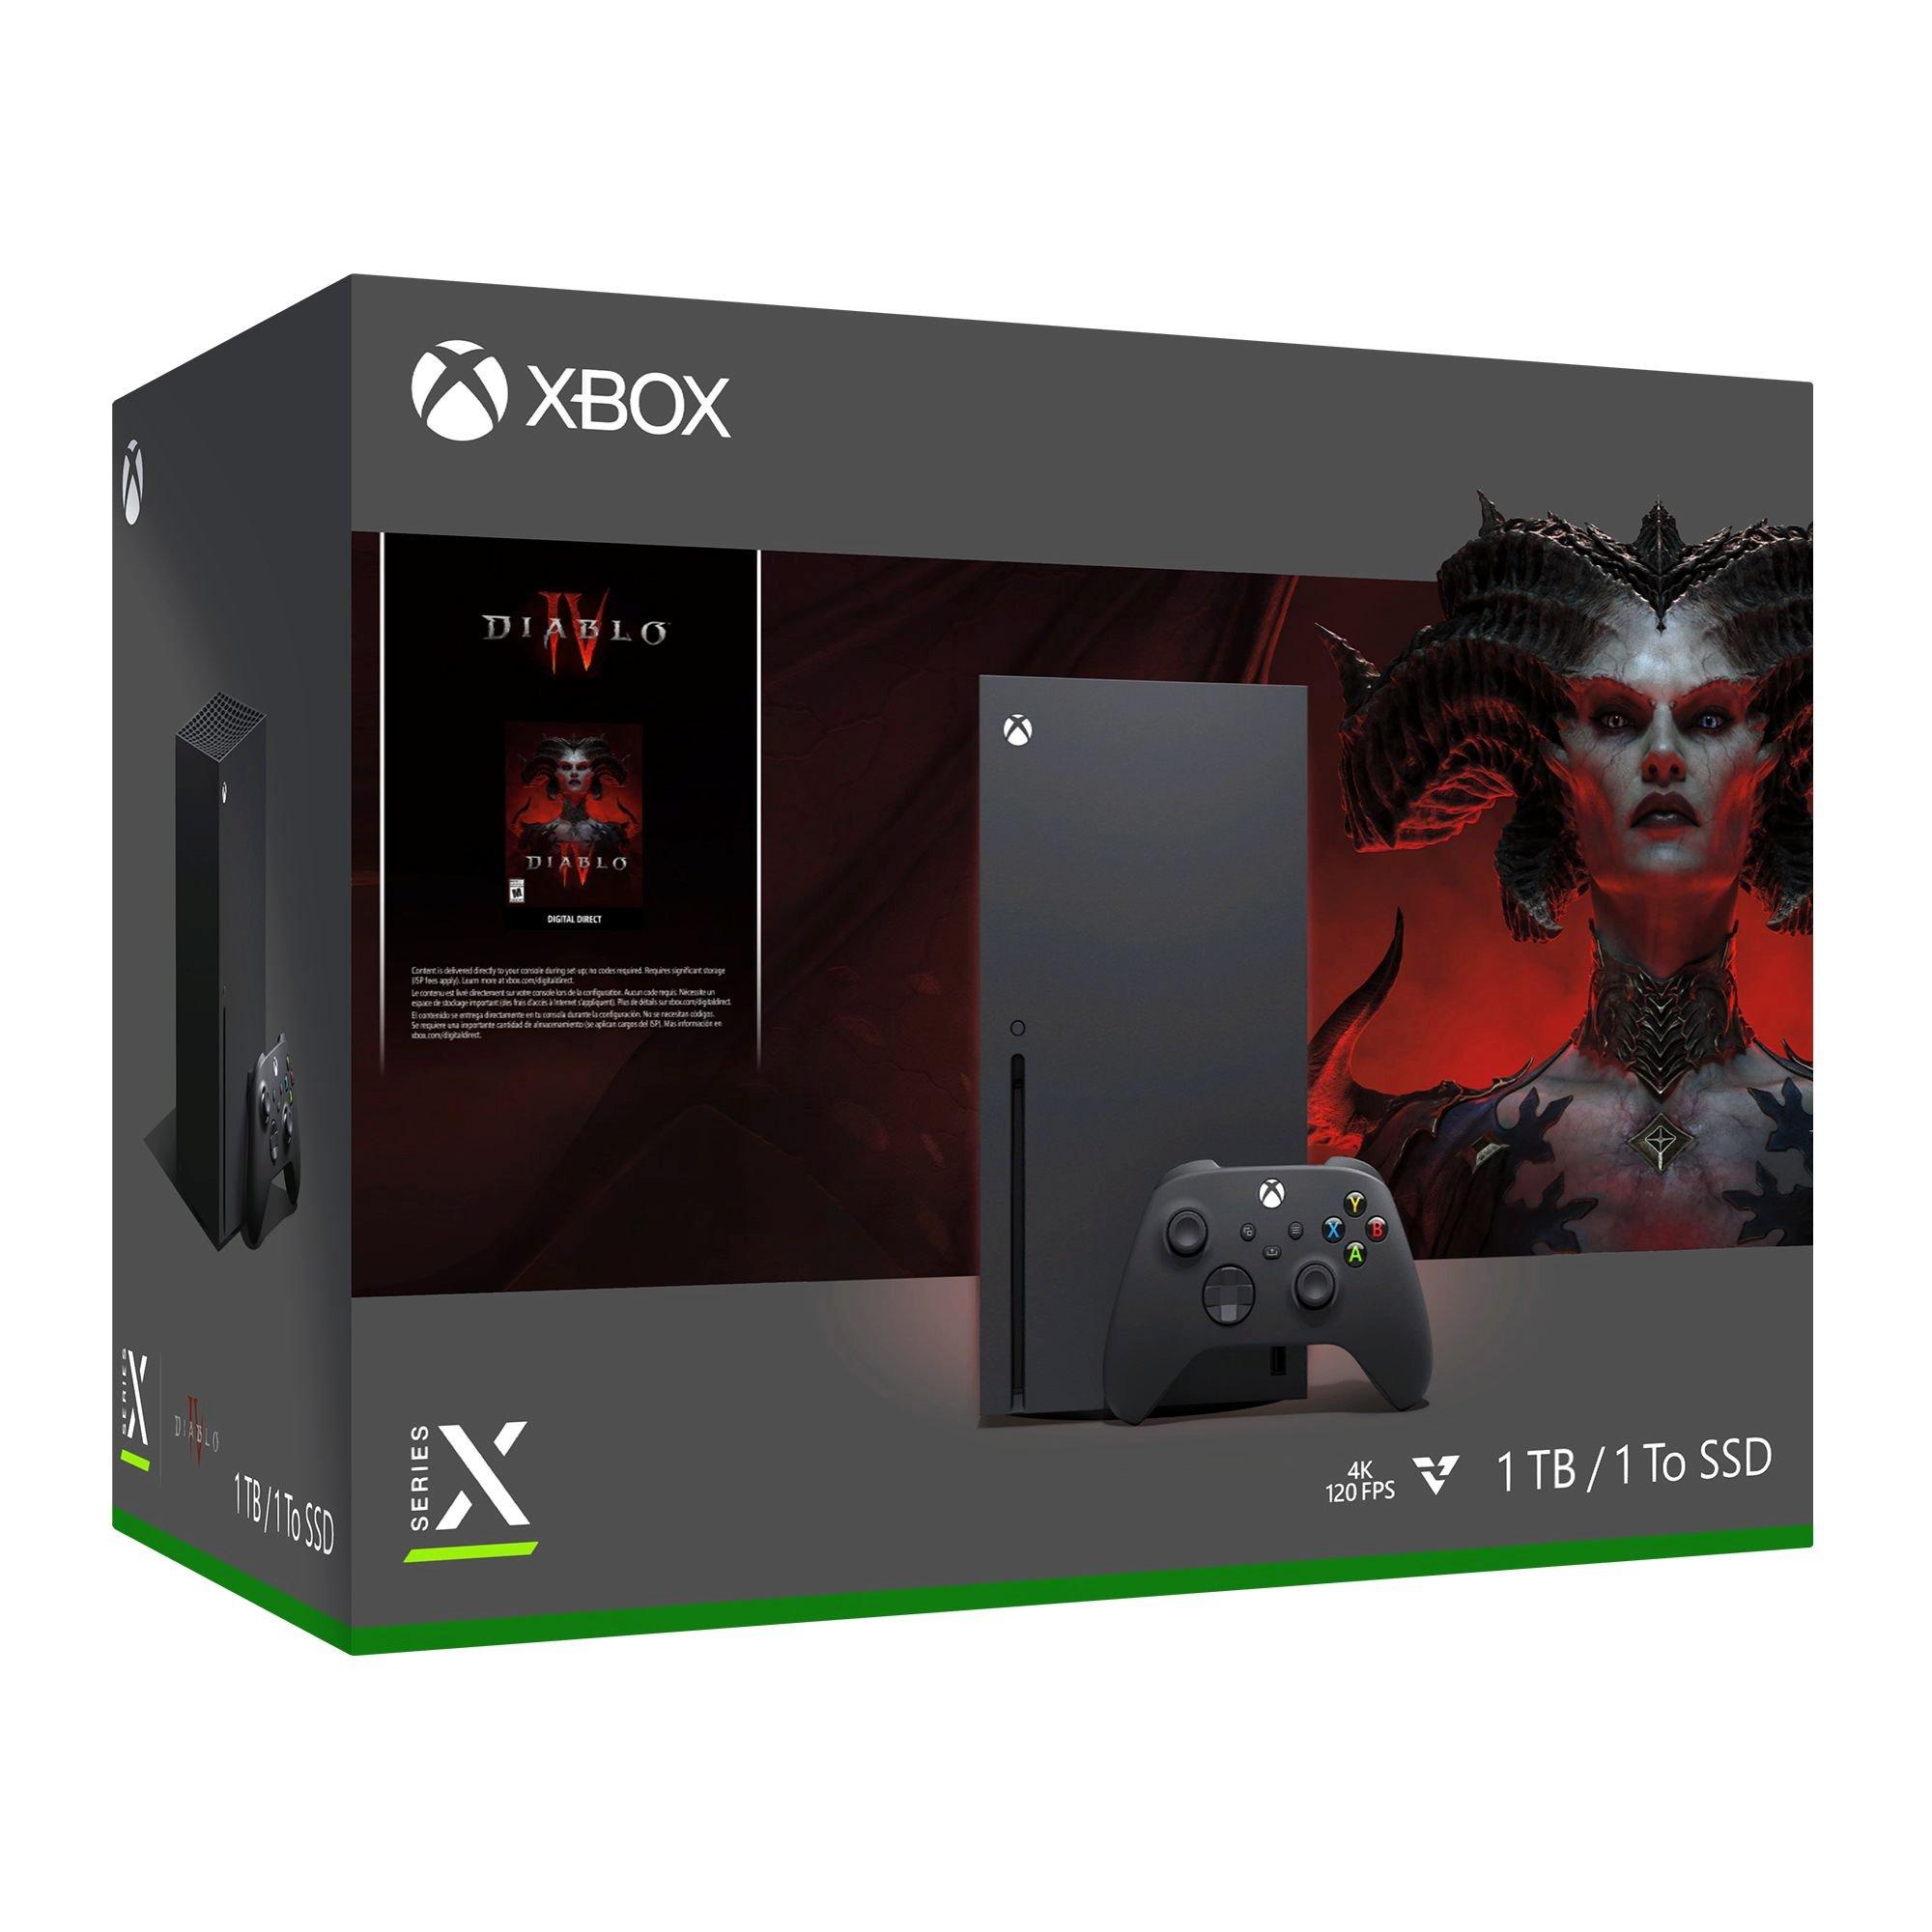 Microsoft Xbox Series X 1TB SSD Gaming Console with 1 Xbox